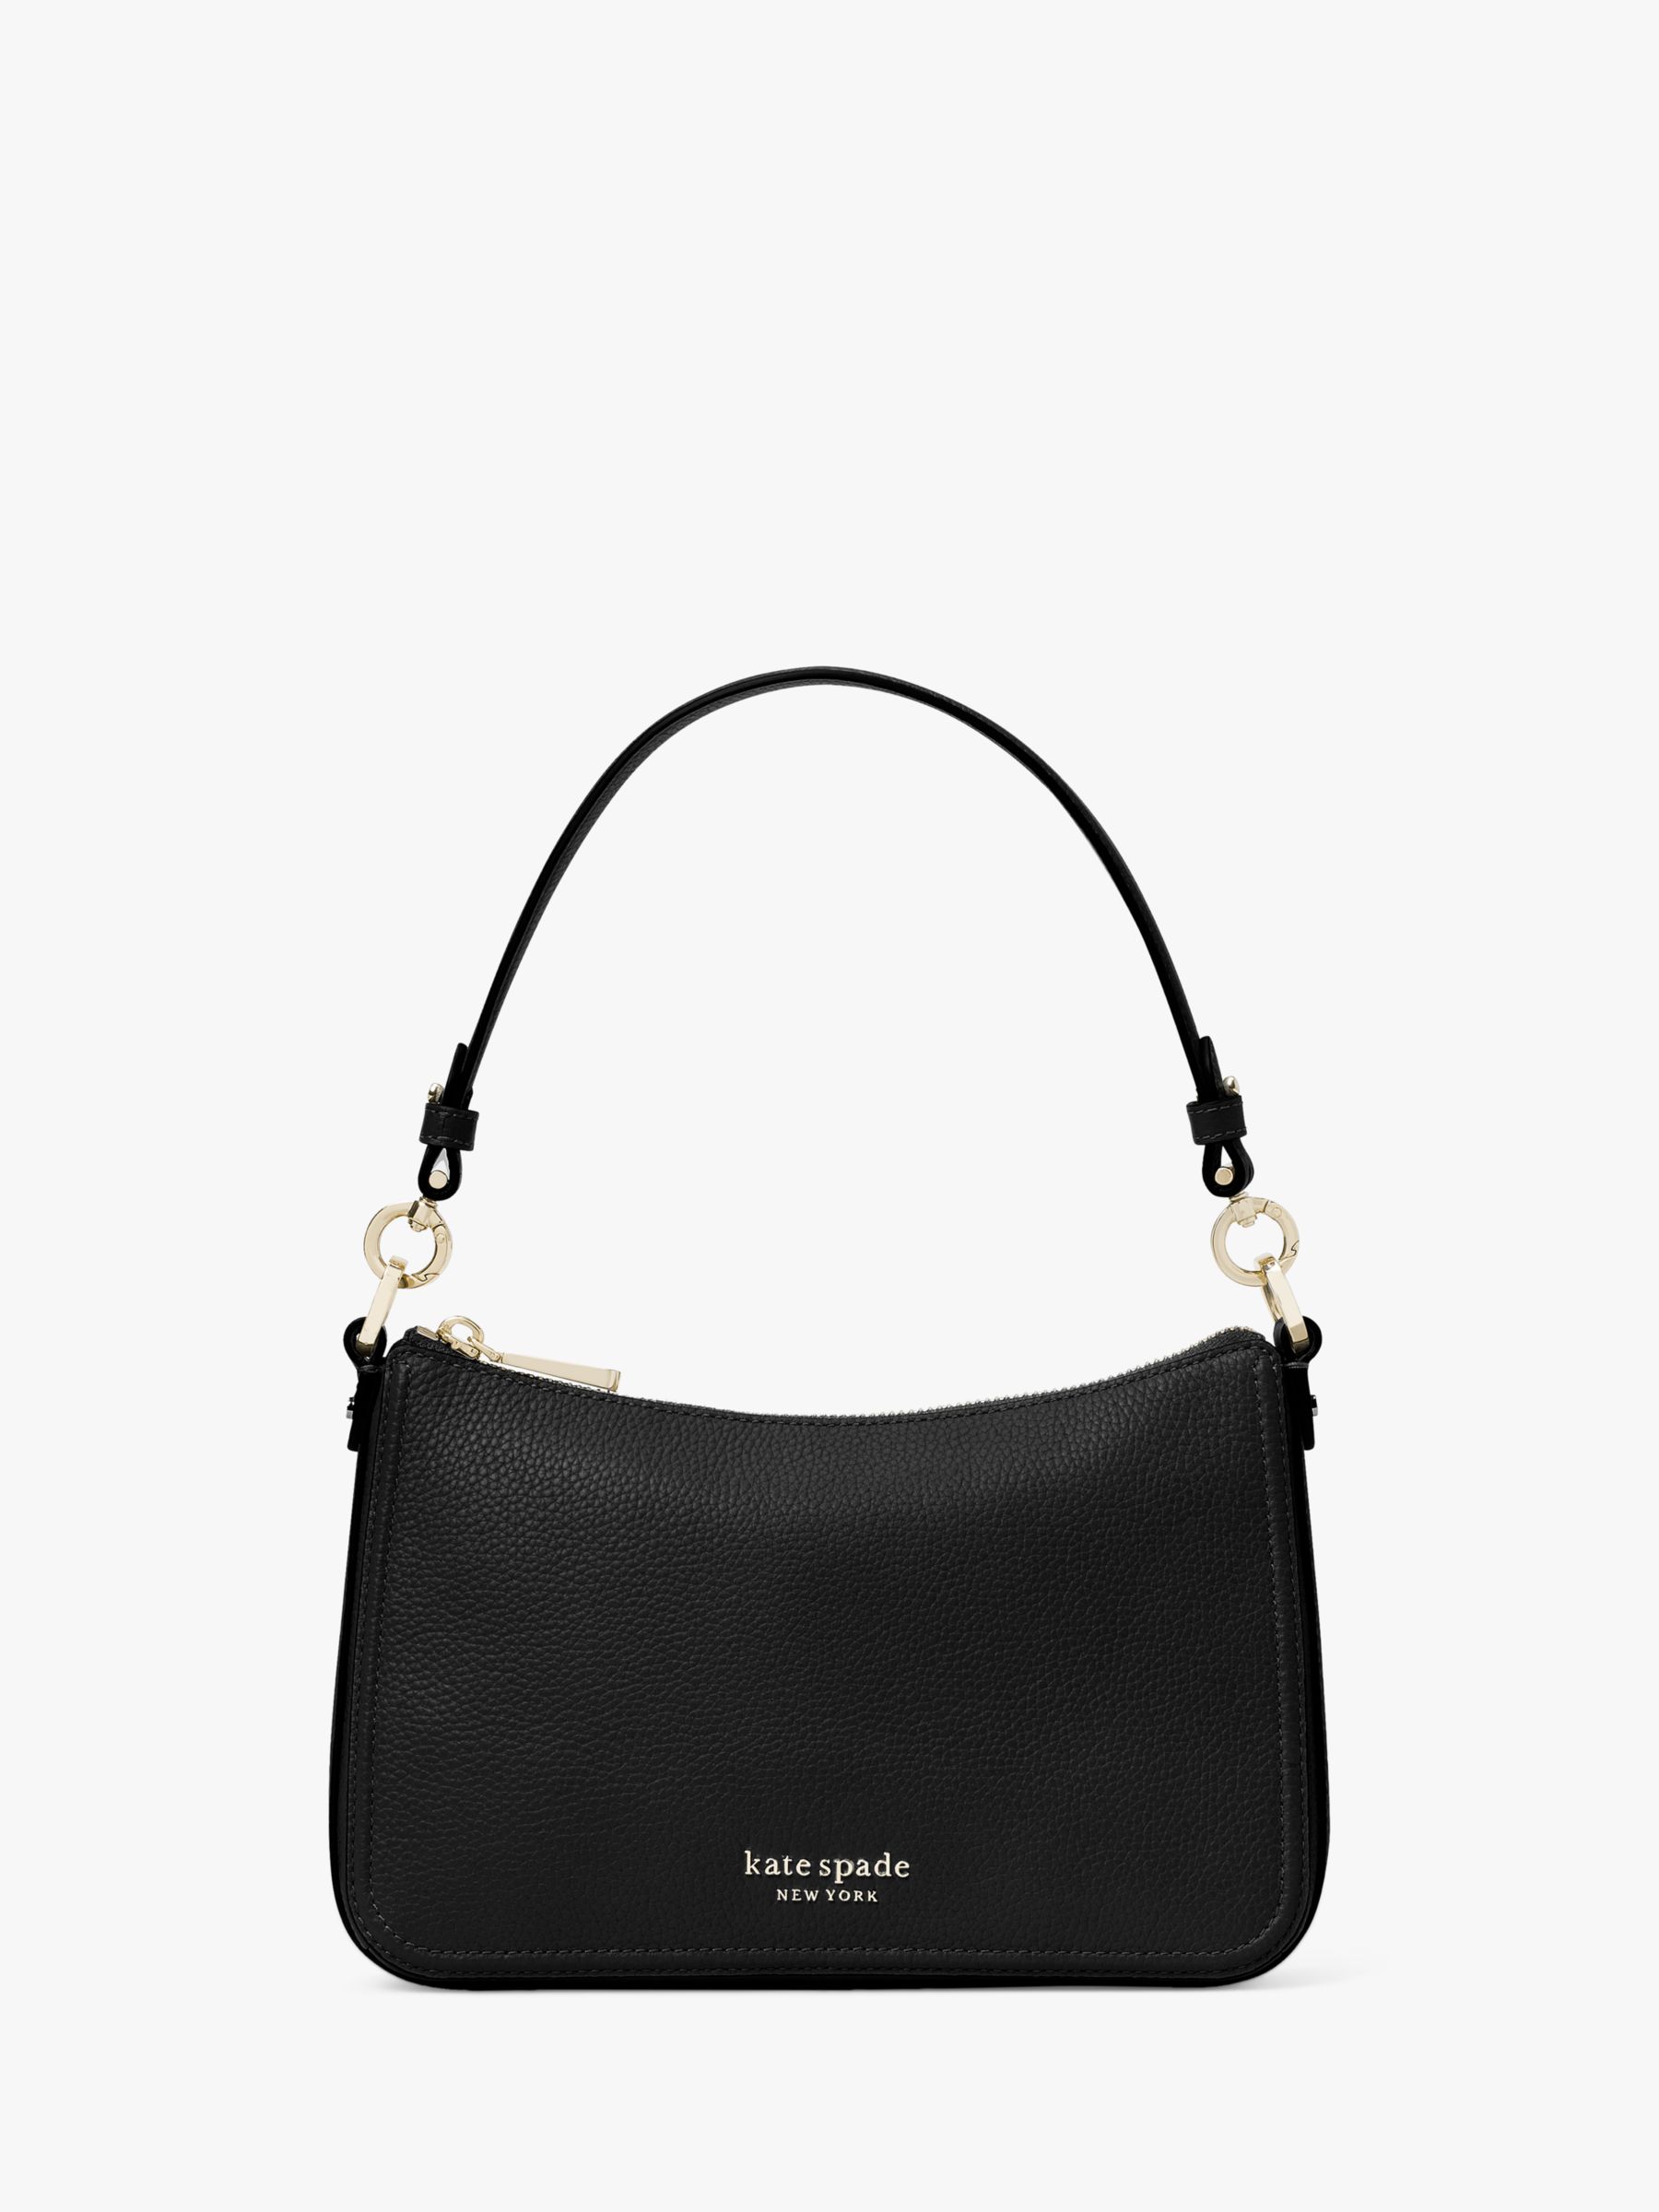 kate spade new york Hudson Leather Convertible Cross Body Bag, Parchment